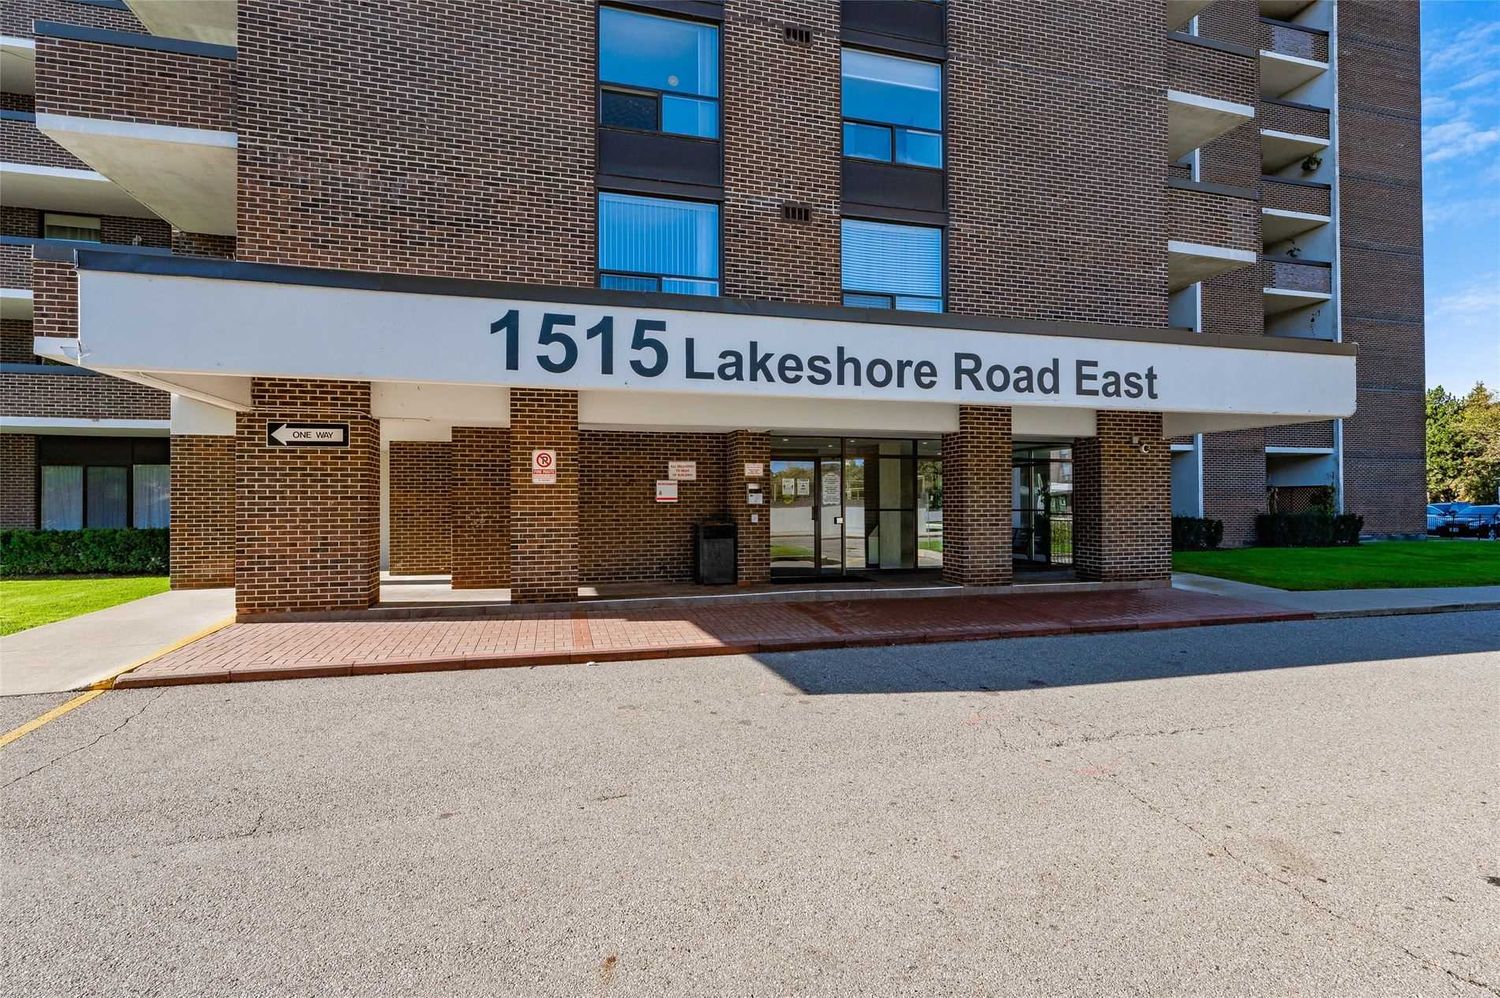 1515 Lakeshore Road E. 1515 Lakeshore Road East Condos is located in  Mississauga, Toronto - image #3 of 3